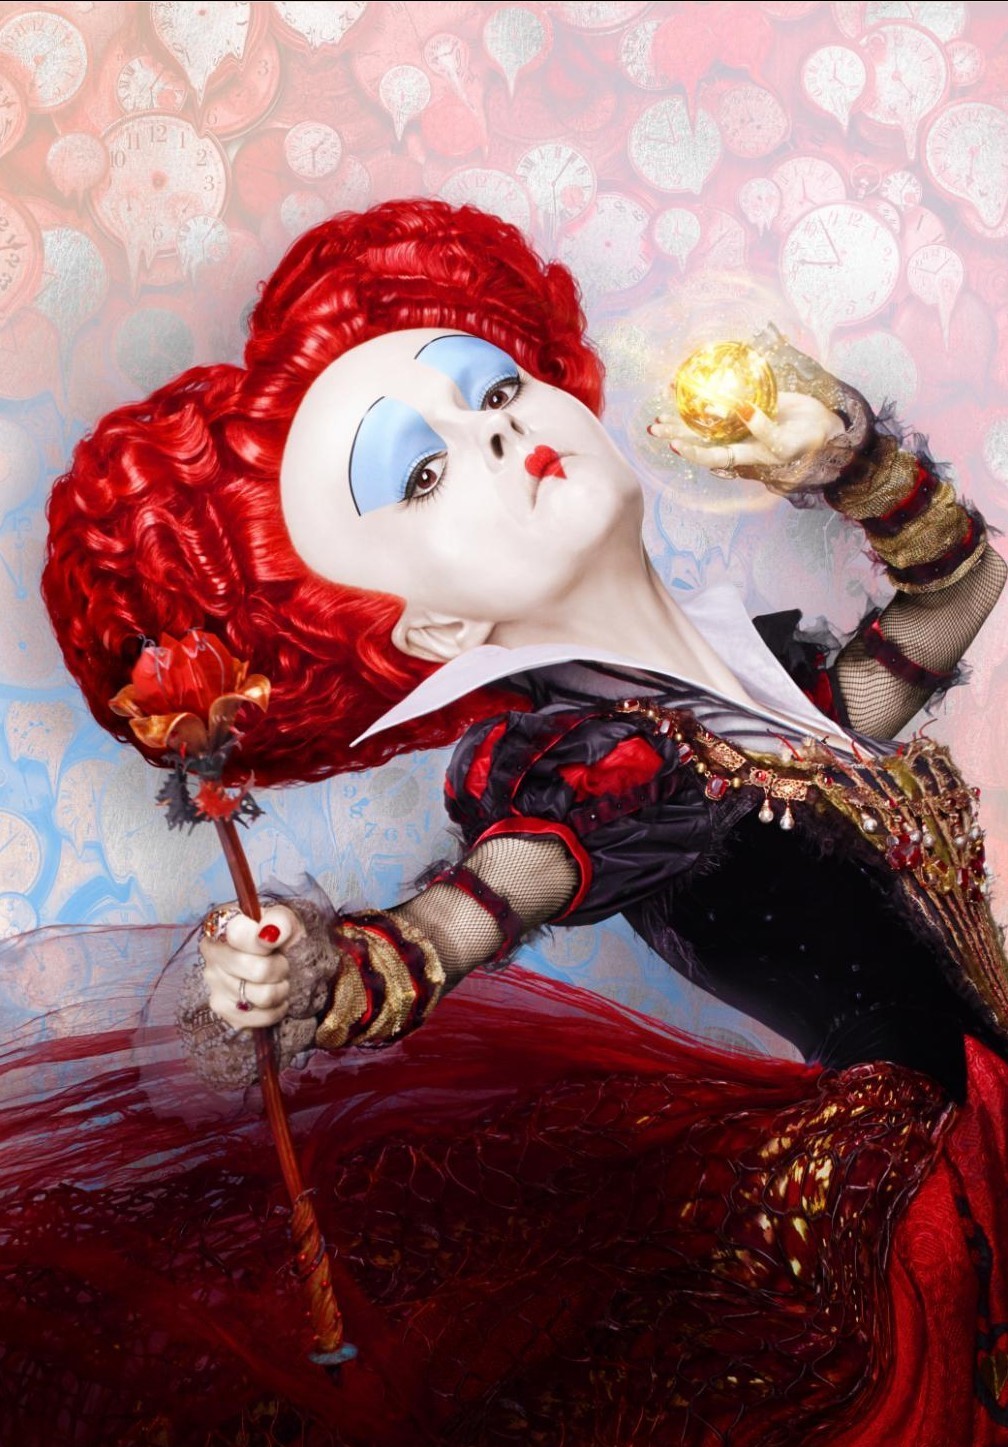 https://static.wikia.nocookie.net/villains/images/0/05/Queen-of-Hearts-Alice-Through-the-Looking-Glass-e1446877840902.jpg/revision/latest?cb=20230911050808